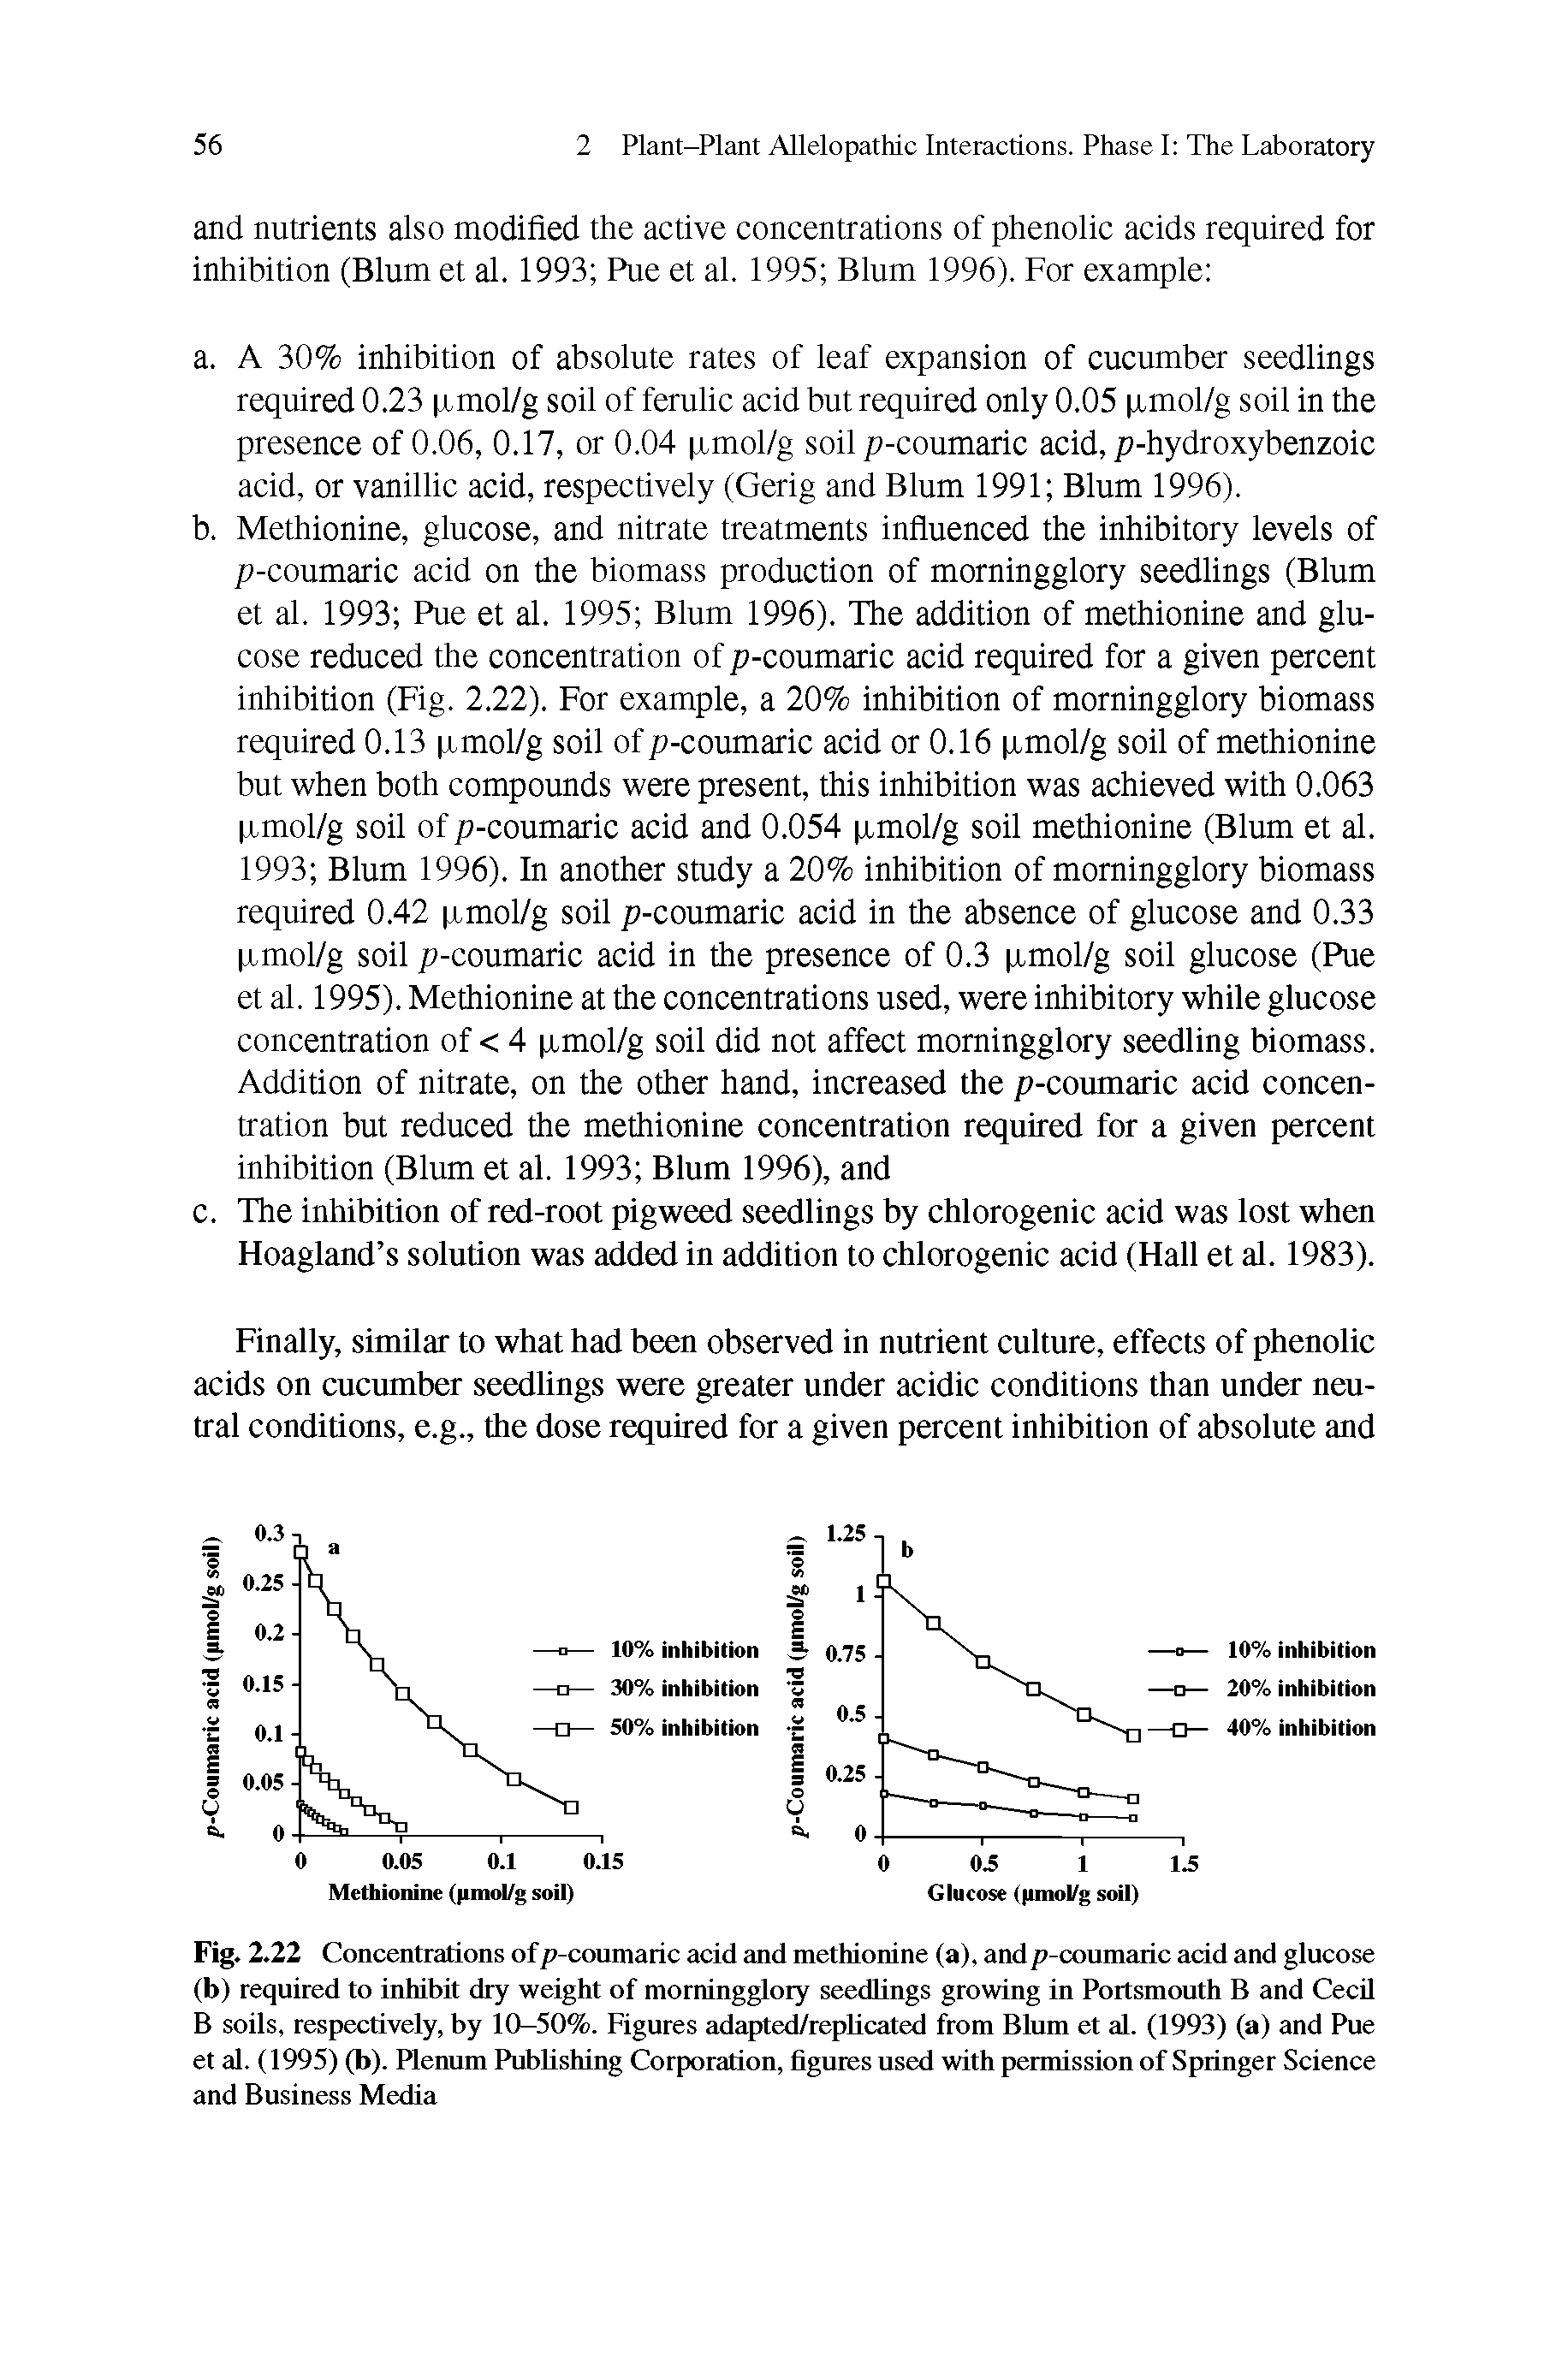 Fig. 2.22 Concentrations of p-coumaric acid and metMonine (a), and p-coumaric acid and glucose (b) required to inhibit dry weight of morningglory seedlings growing in Portsmouth B and Cecil B soils, respectively, by 10-50%. Figures adapted/repUcated from Blum et al. (1993) (a) and Pue et al. (1995) (b). Plenum Publishing Corporation, figuresused with permission of Springer Science and Business Media...